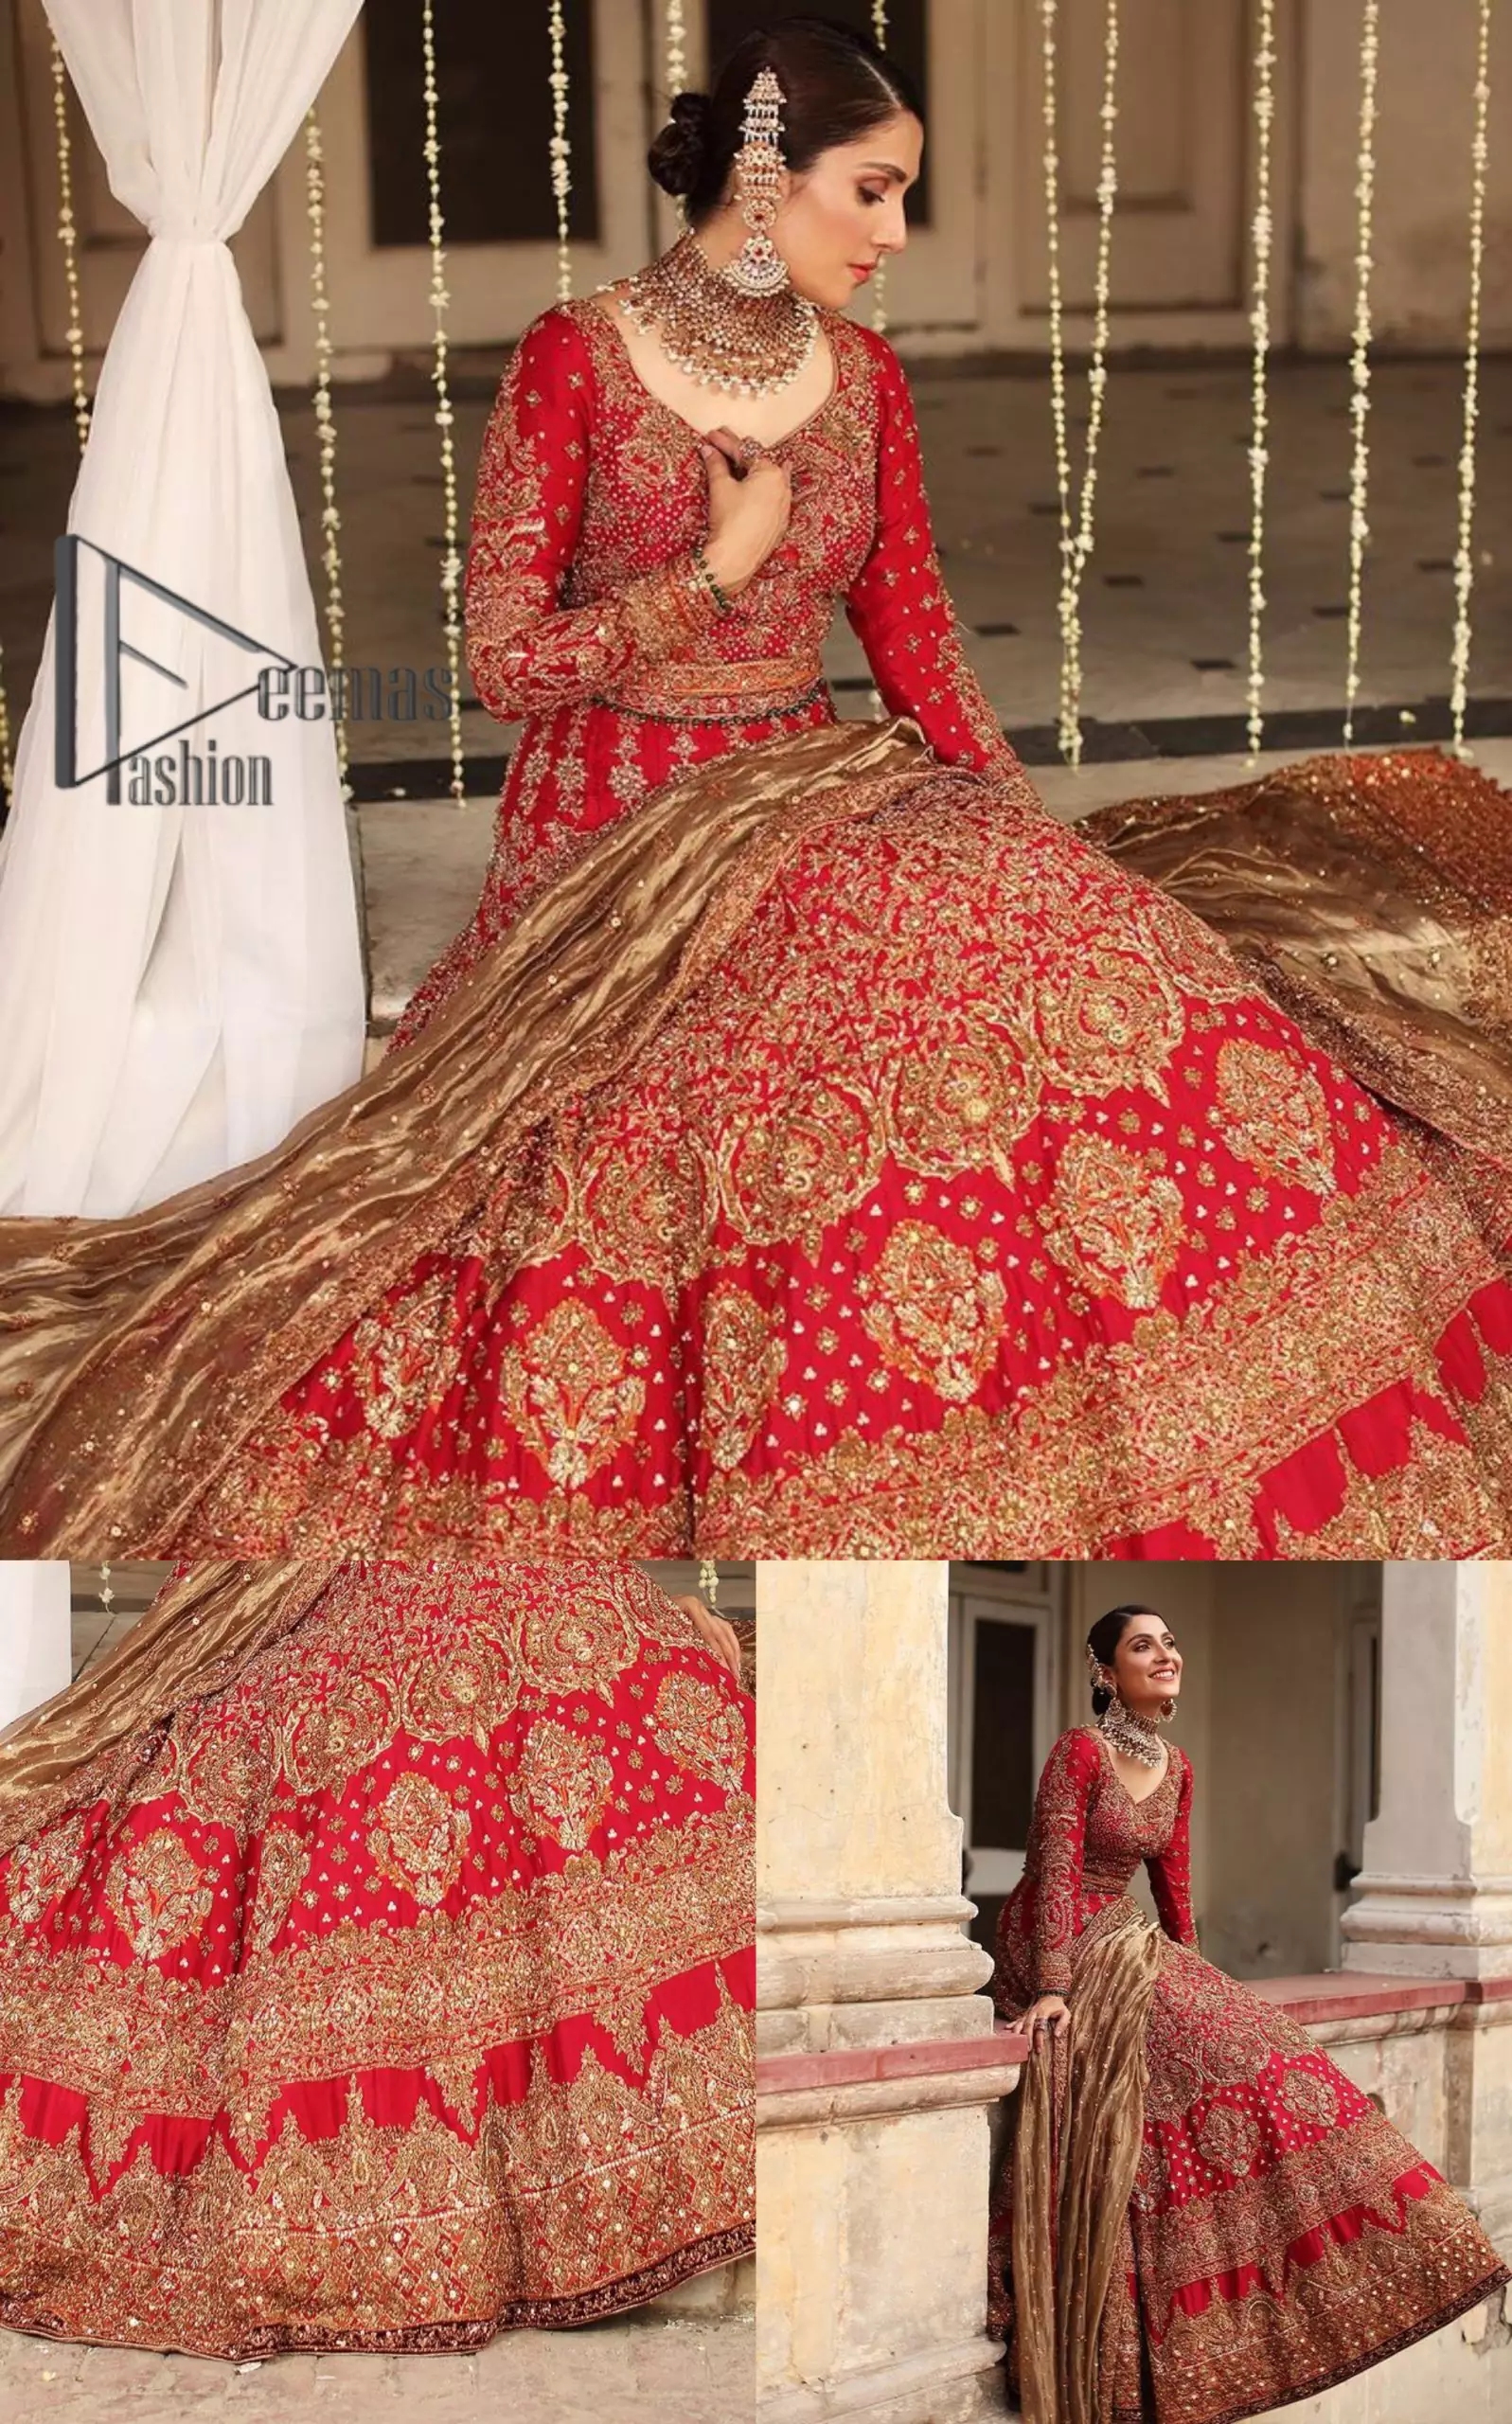 Dress up for your occasion, it's time to dance on your big day. Give a fresh twist to your wedding Big day outfits with this eye-catching red article. Reveal your day with the red heavy blouse that is attractively adorned with golden embroidery which includes tilla, dabka, kora work so that you can embezzle everyone's attraction. In addition to this, the sweetheart neckline of the blouse is just soothing when comes with full sleeves. The blouse is coordinated with a red lehenga that is heavily embellished with marvellous embroidery to give you a queen look. Complete this outfit with a golden dupatta which enhanced the beauty of the outfit.